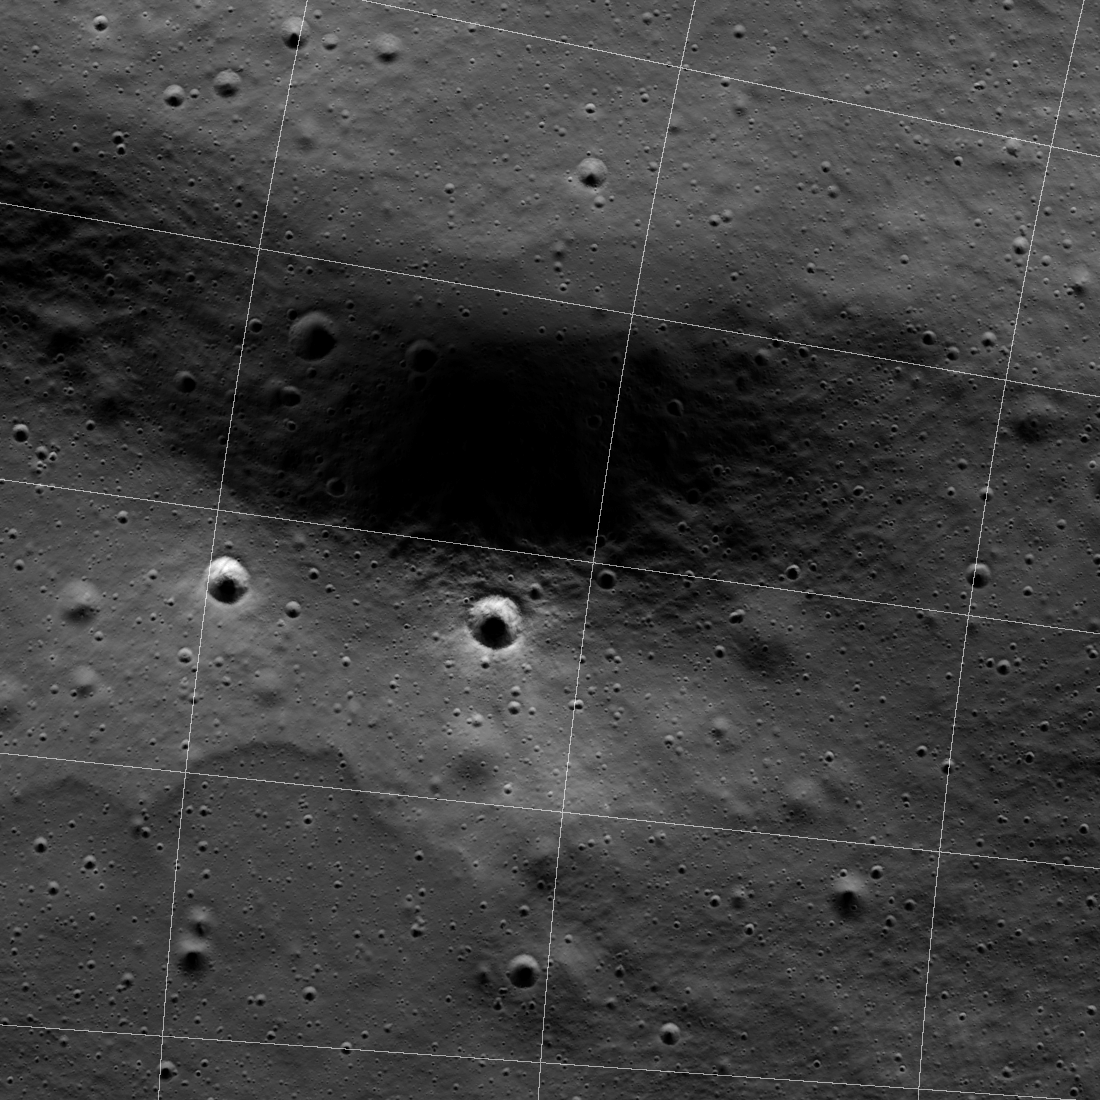 Detail of floor of Spudis Crater (within PSR)